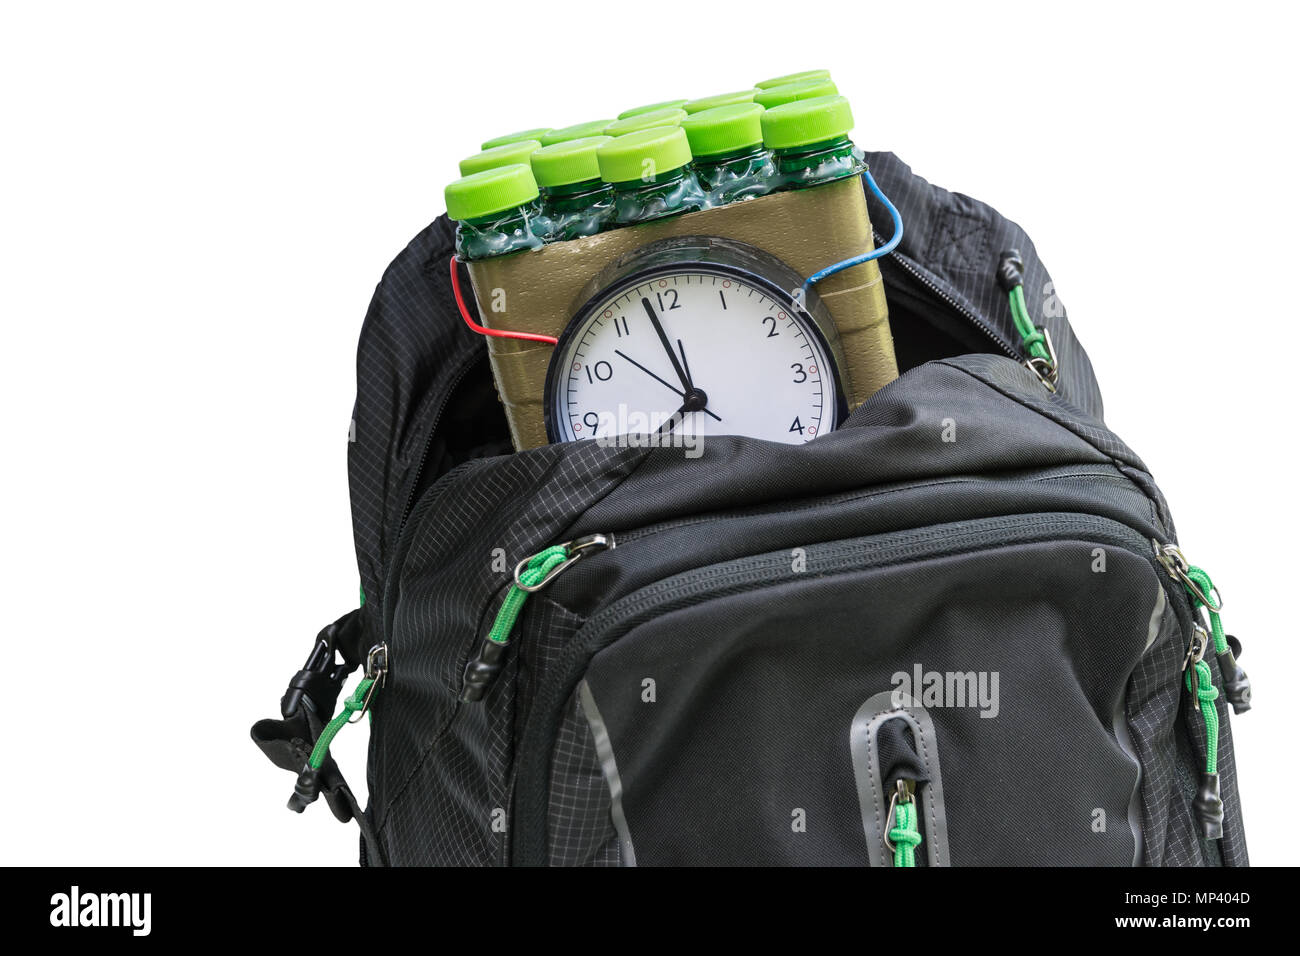 Timed bomb in the backpack. Detail of black rucksack with imitation of dangerous explosive. Isolated on a white background. Terroristic attack. Stock Photo